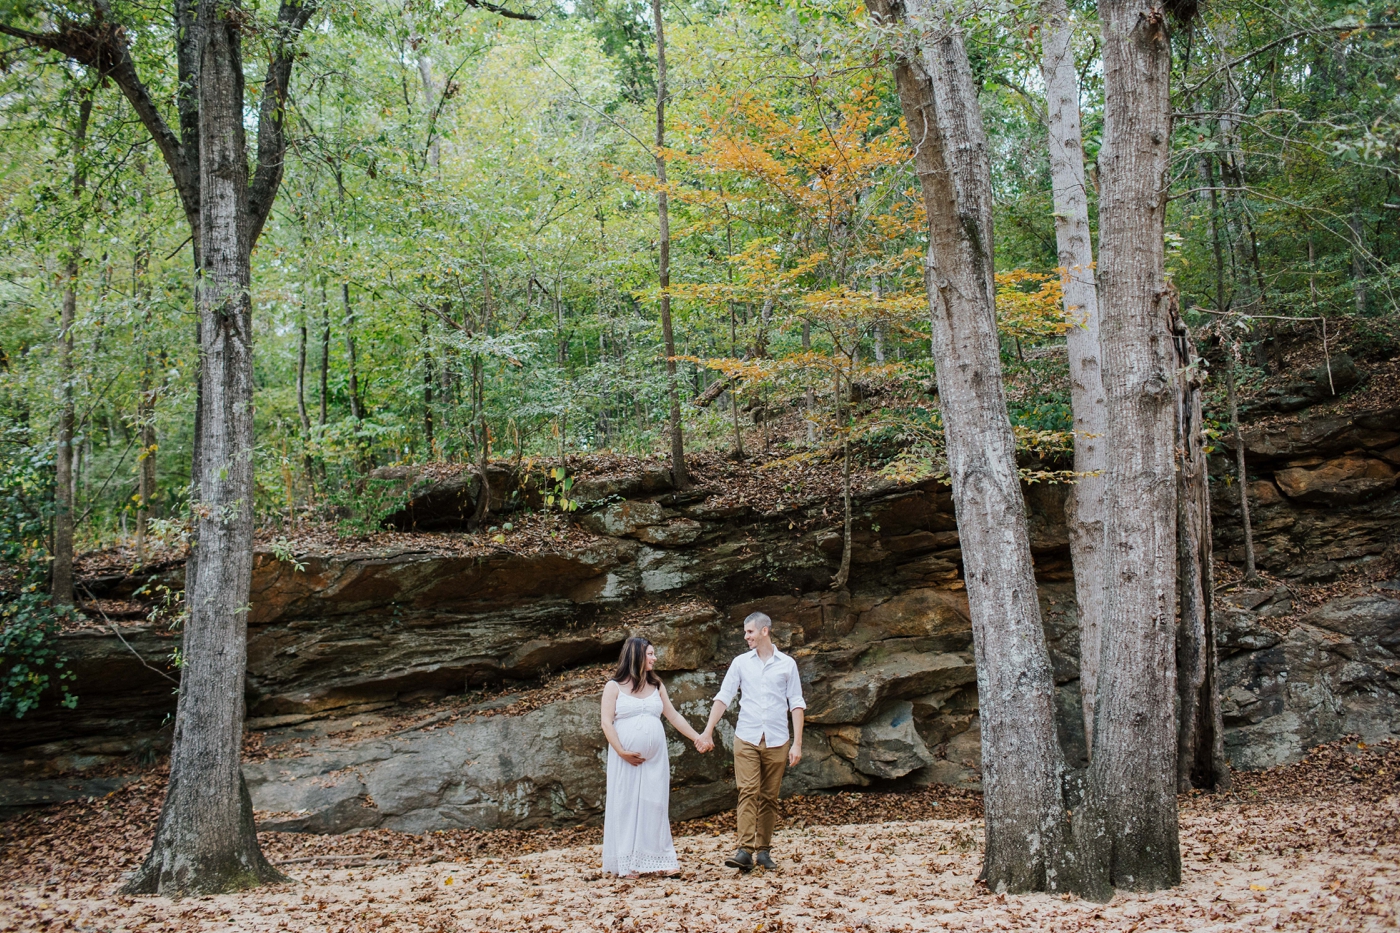 Alison & Tim’s Maternity Session in Athens, Georgia at Ben Burton Park | Izzy and Co.